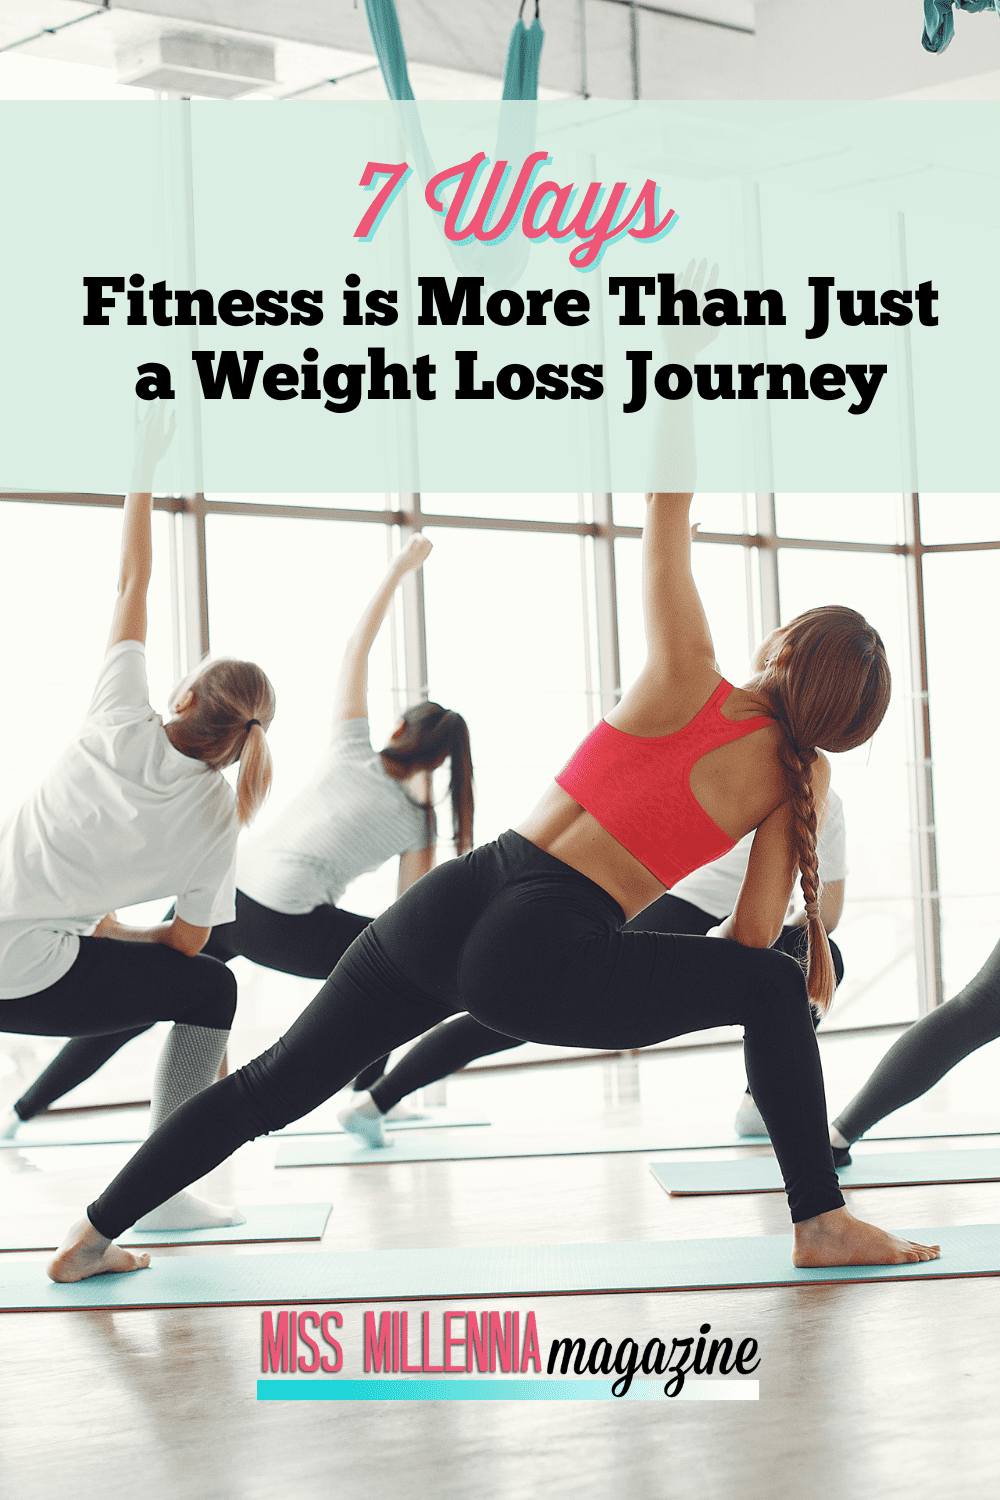 7 Ways Fitness is More Than Just a Weight Loss Journey